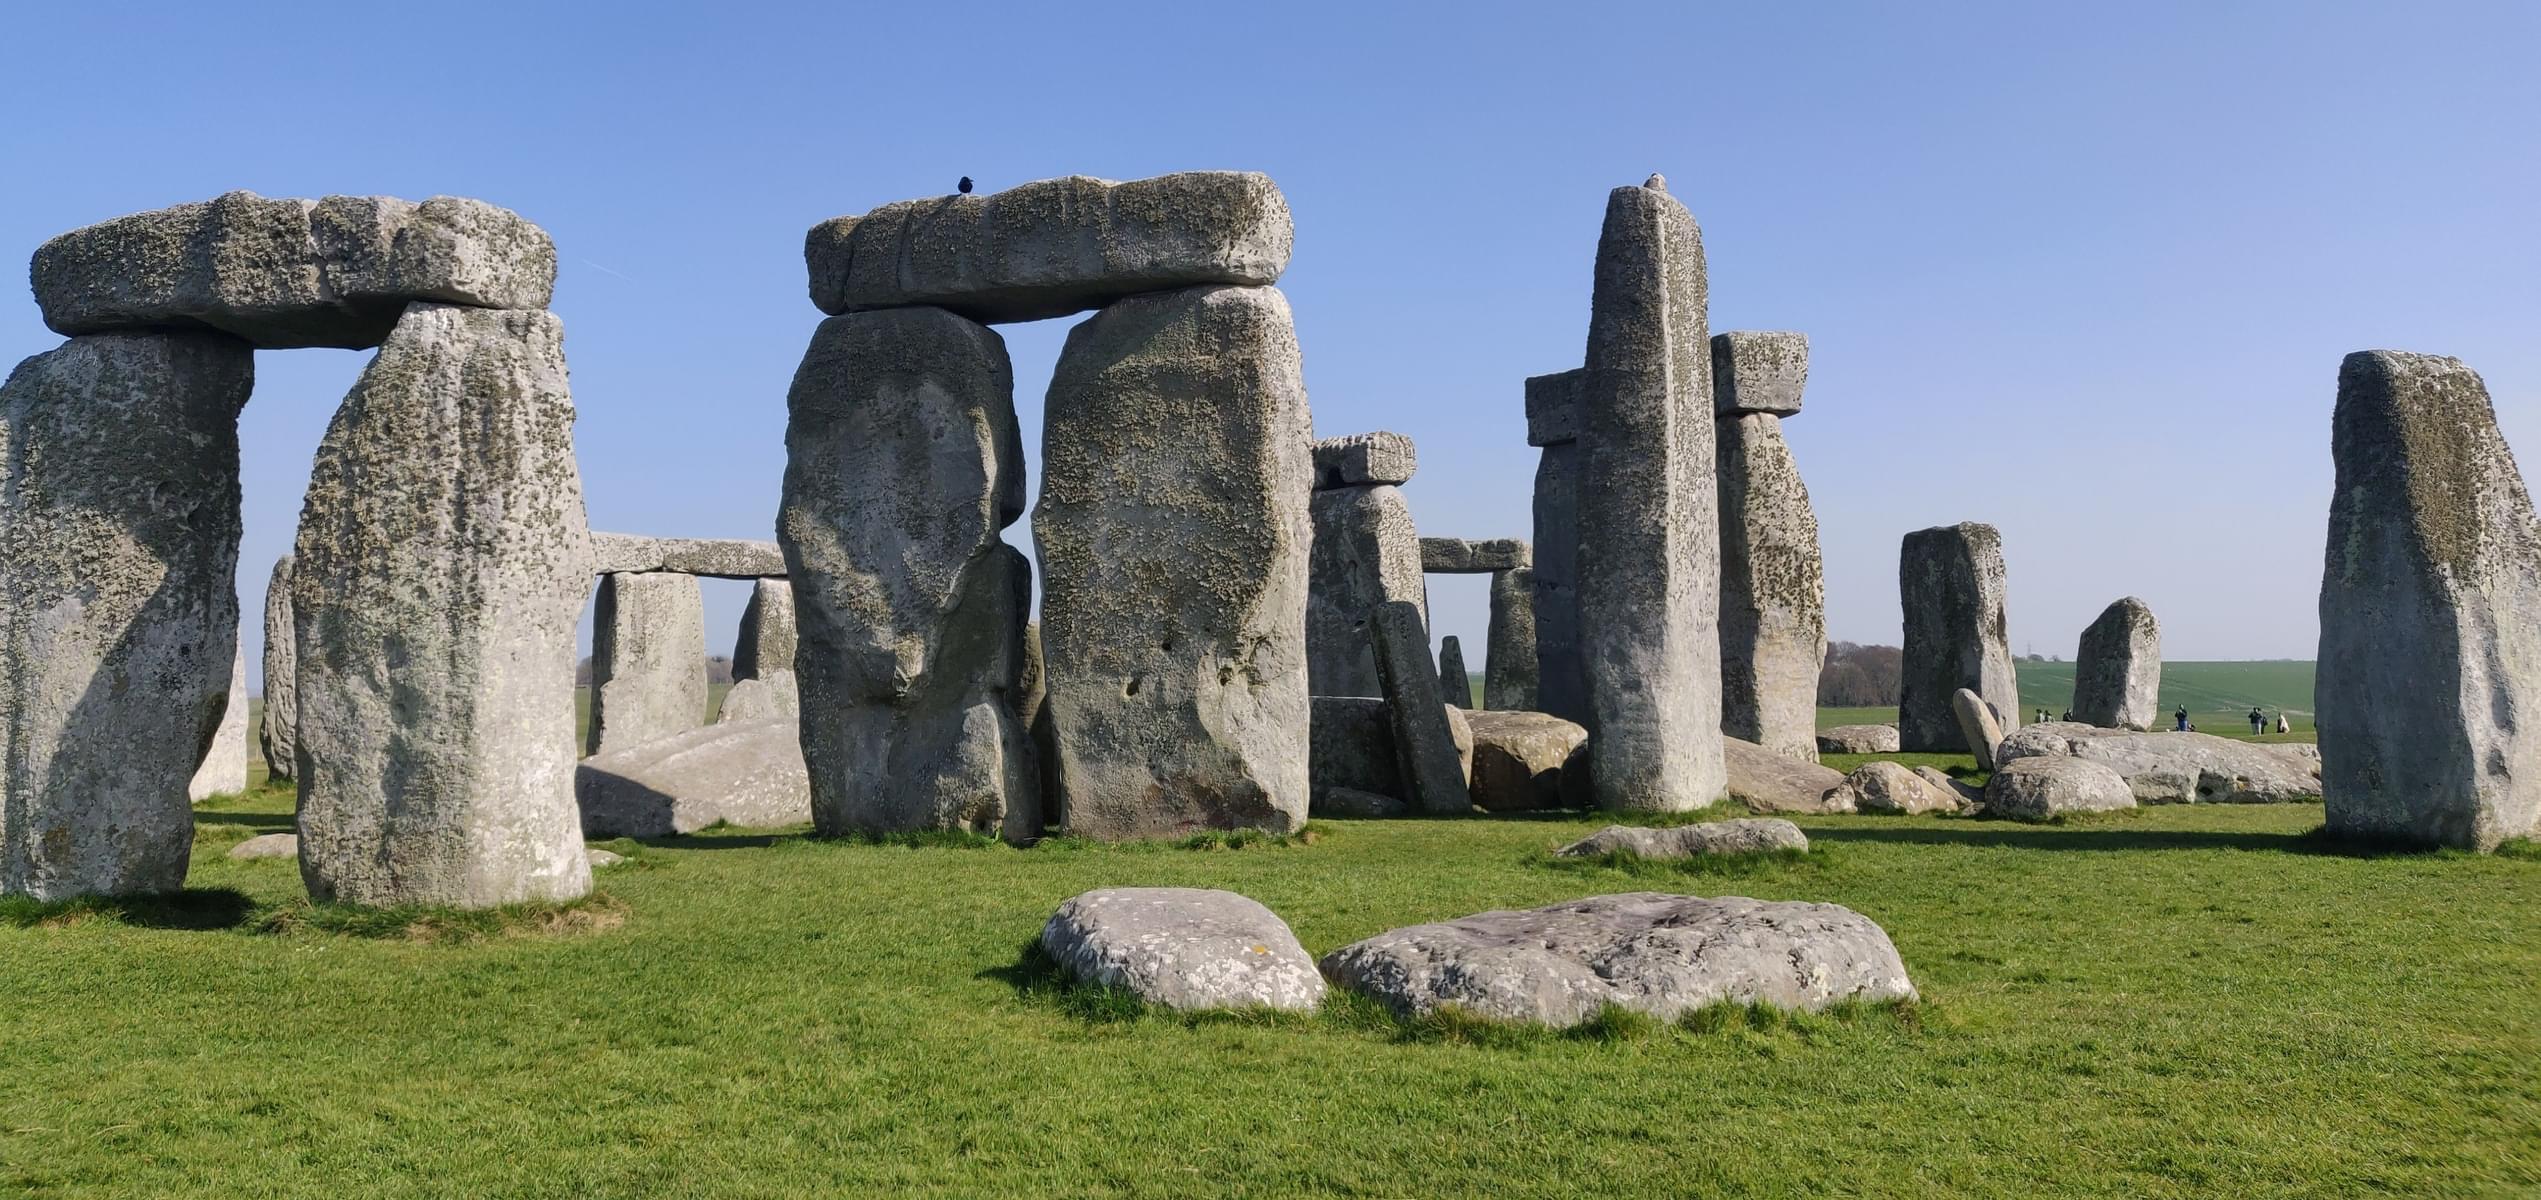 In 1915, Stonehenge Was Purchased At Auction